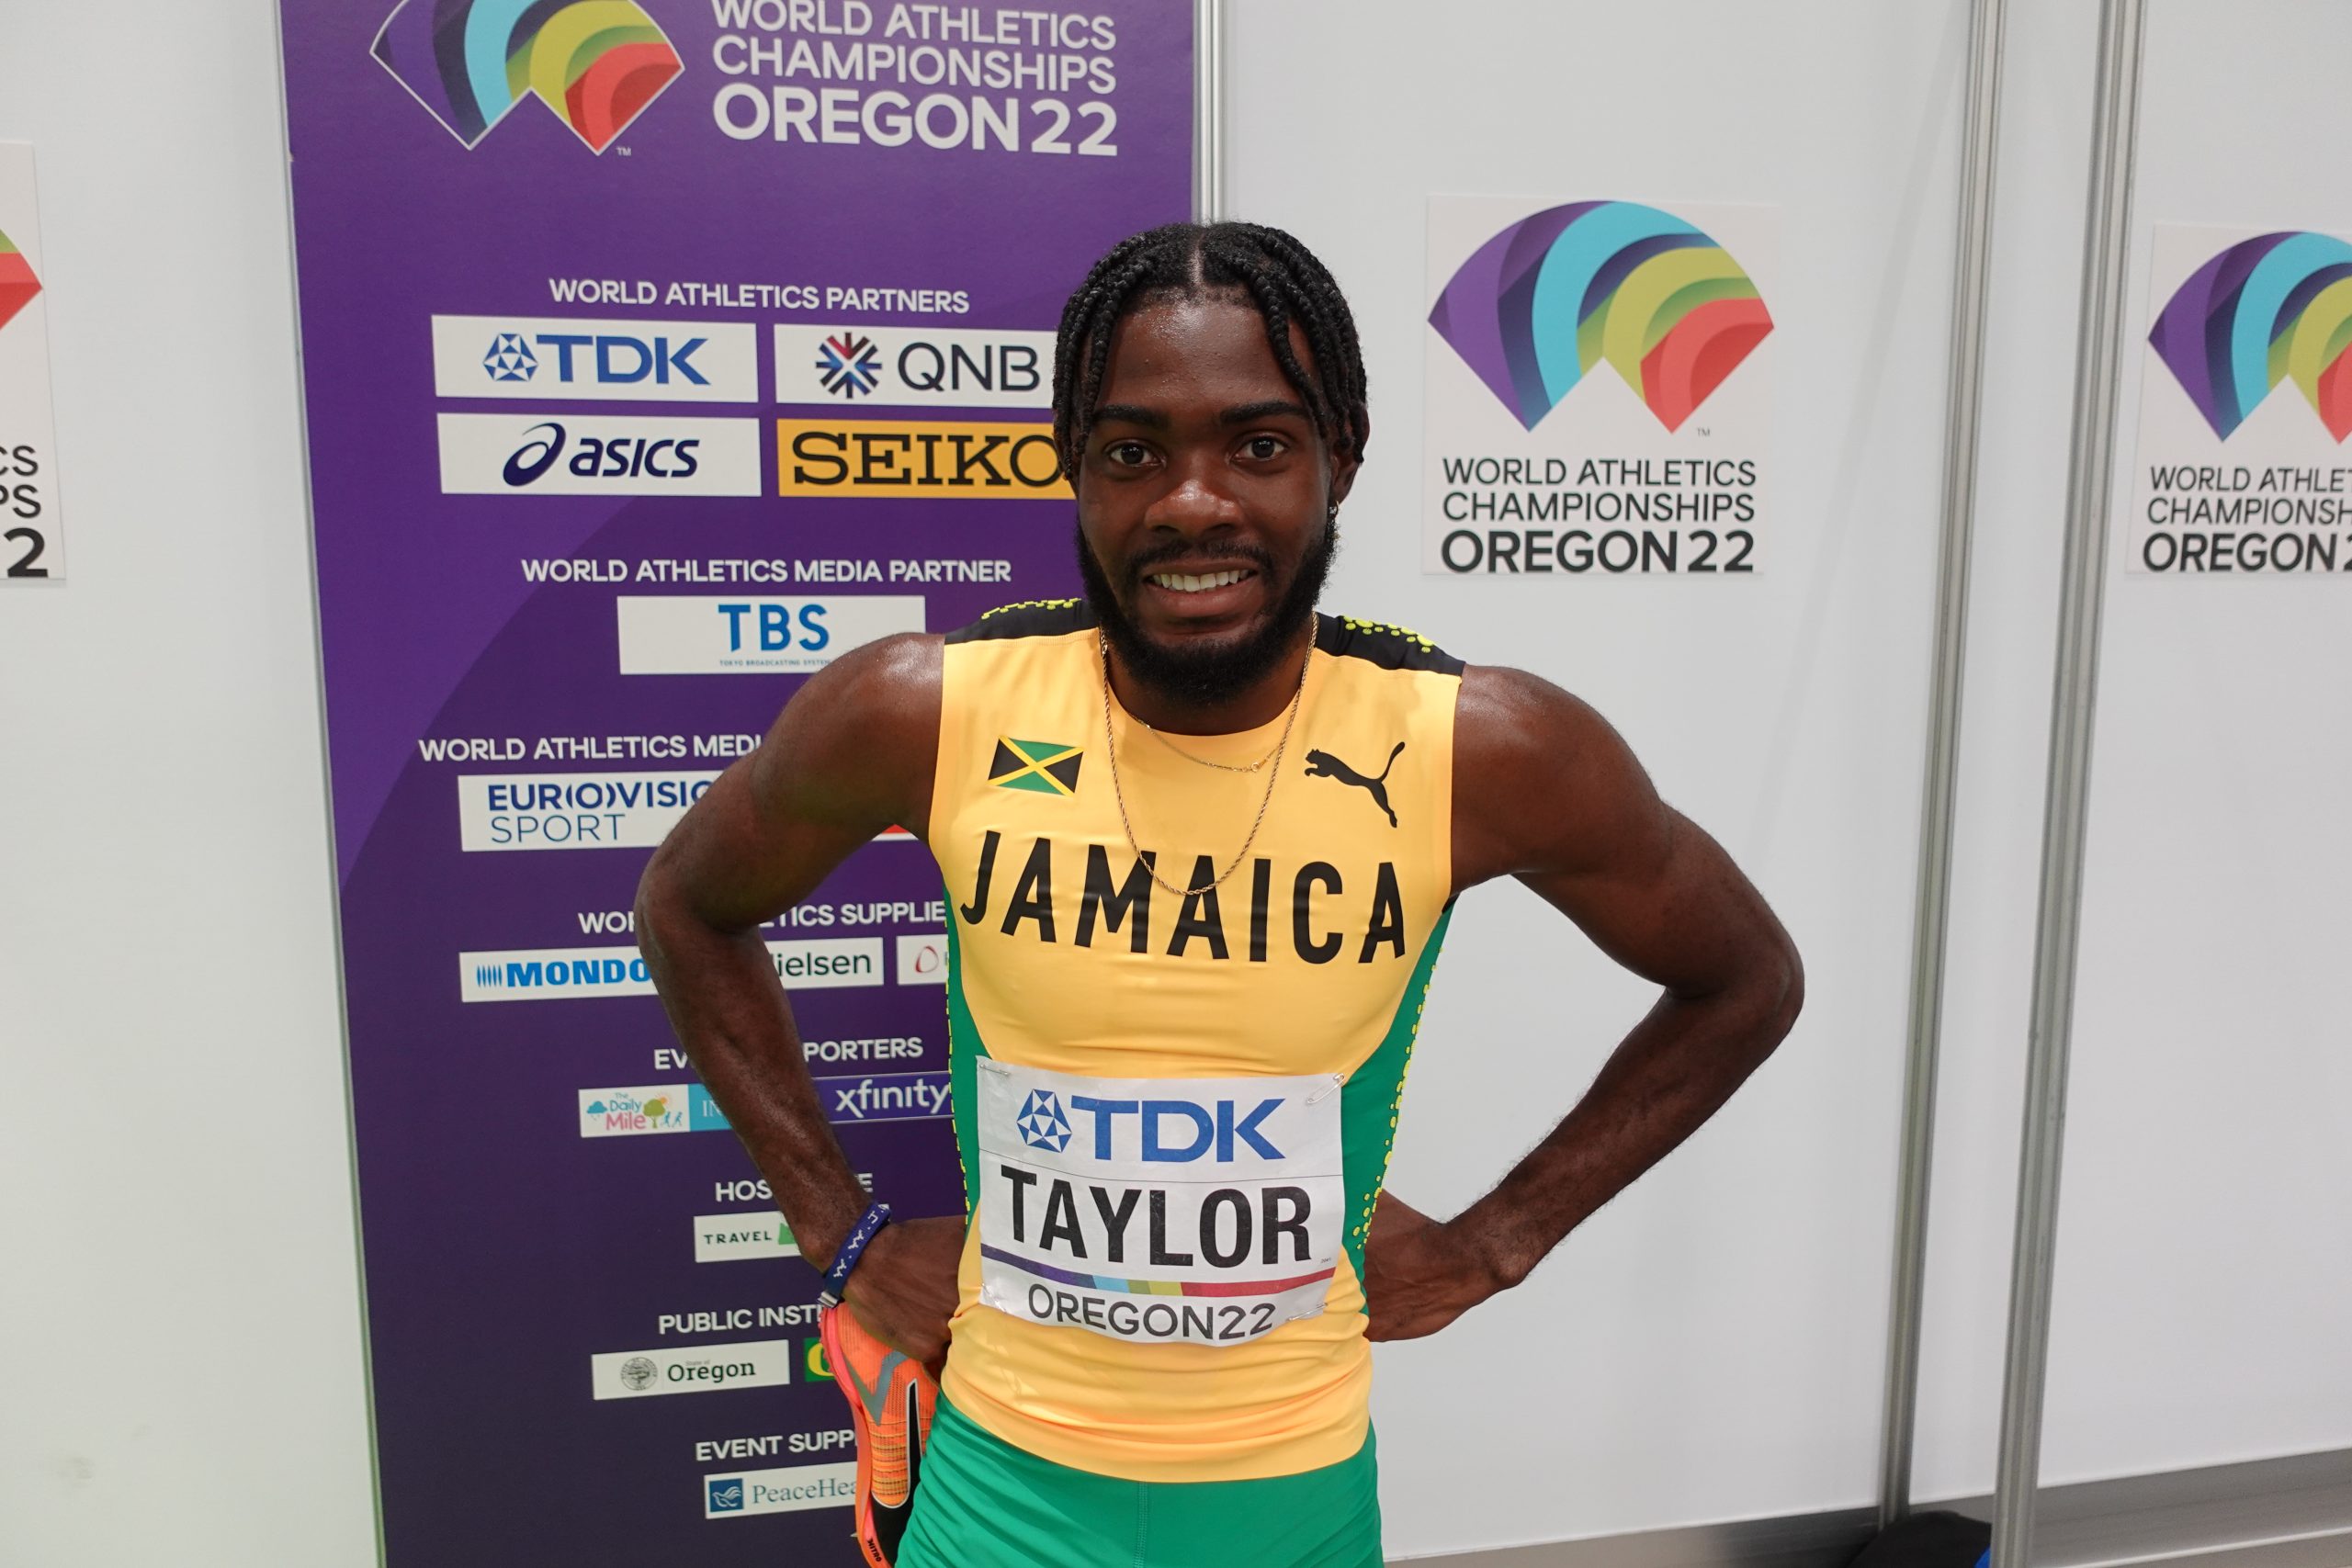 Christopher Taylor at the Oregon22 World Athletics Championships in Eugene, USA